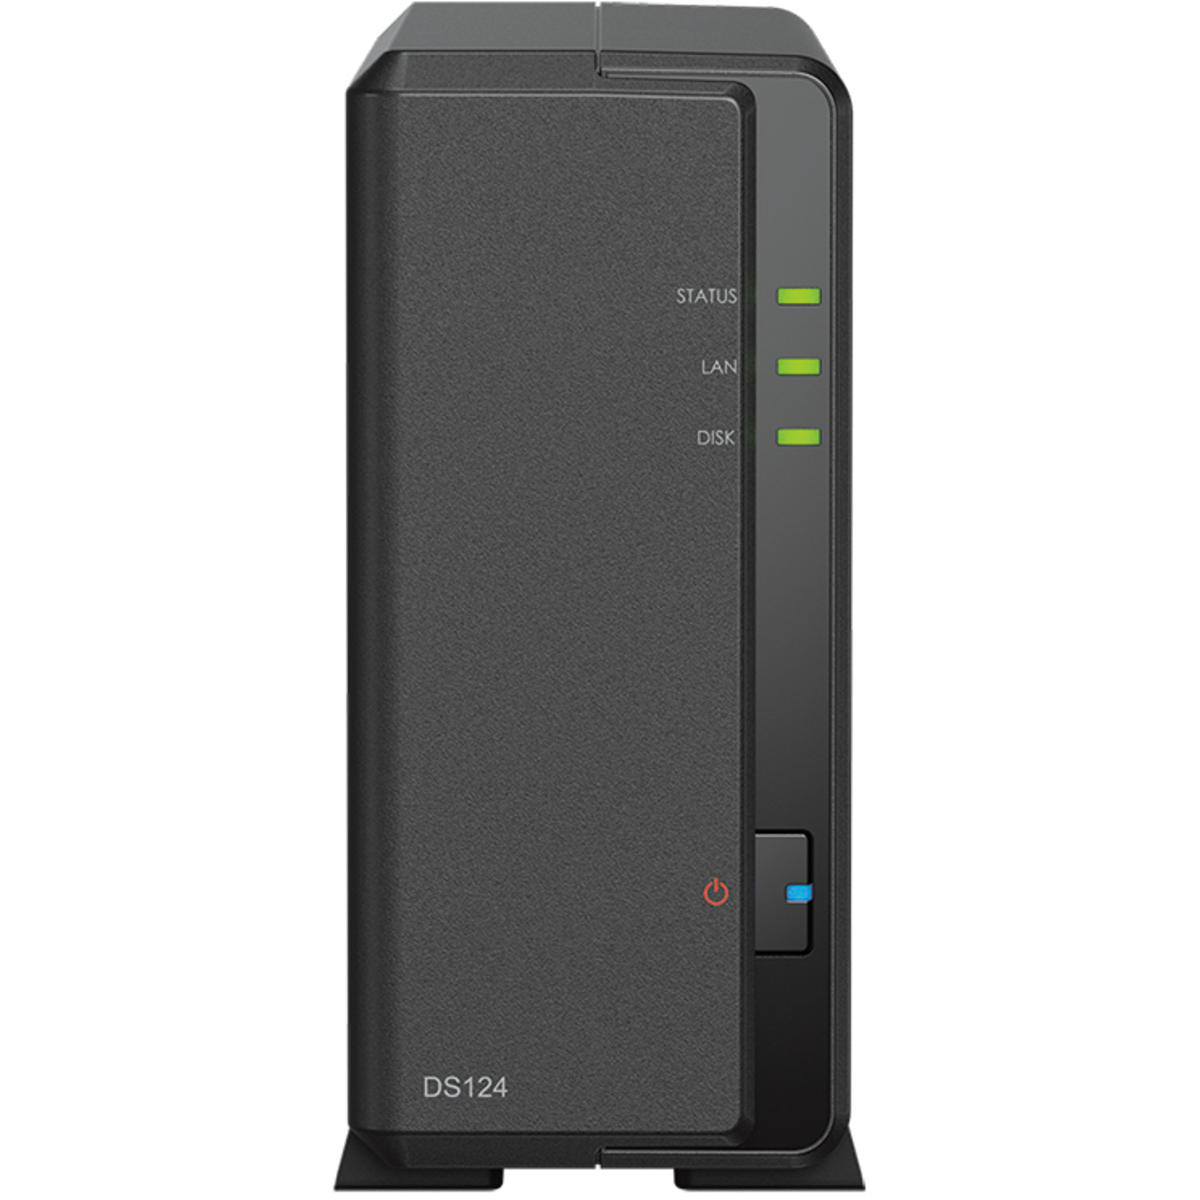 buy Synology DiskStation DS124 22tb Desktop NAS - Network Attached Storage Device 1x22000gb Western Digital Red Pro WD221KFGX 3.5 7200rpm SATA 6Gb/s HDD NAS Class Drives Installed - Burn-In Tested - nas headquarters buy network attached storage server device das new raid-5 free shipping simply usa DiskStation DS124